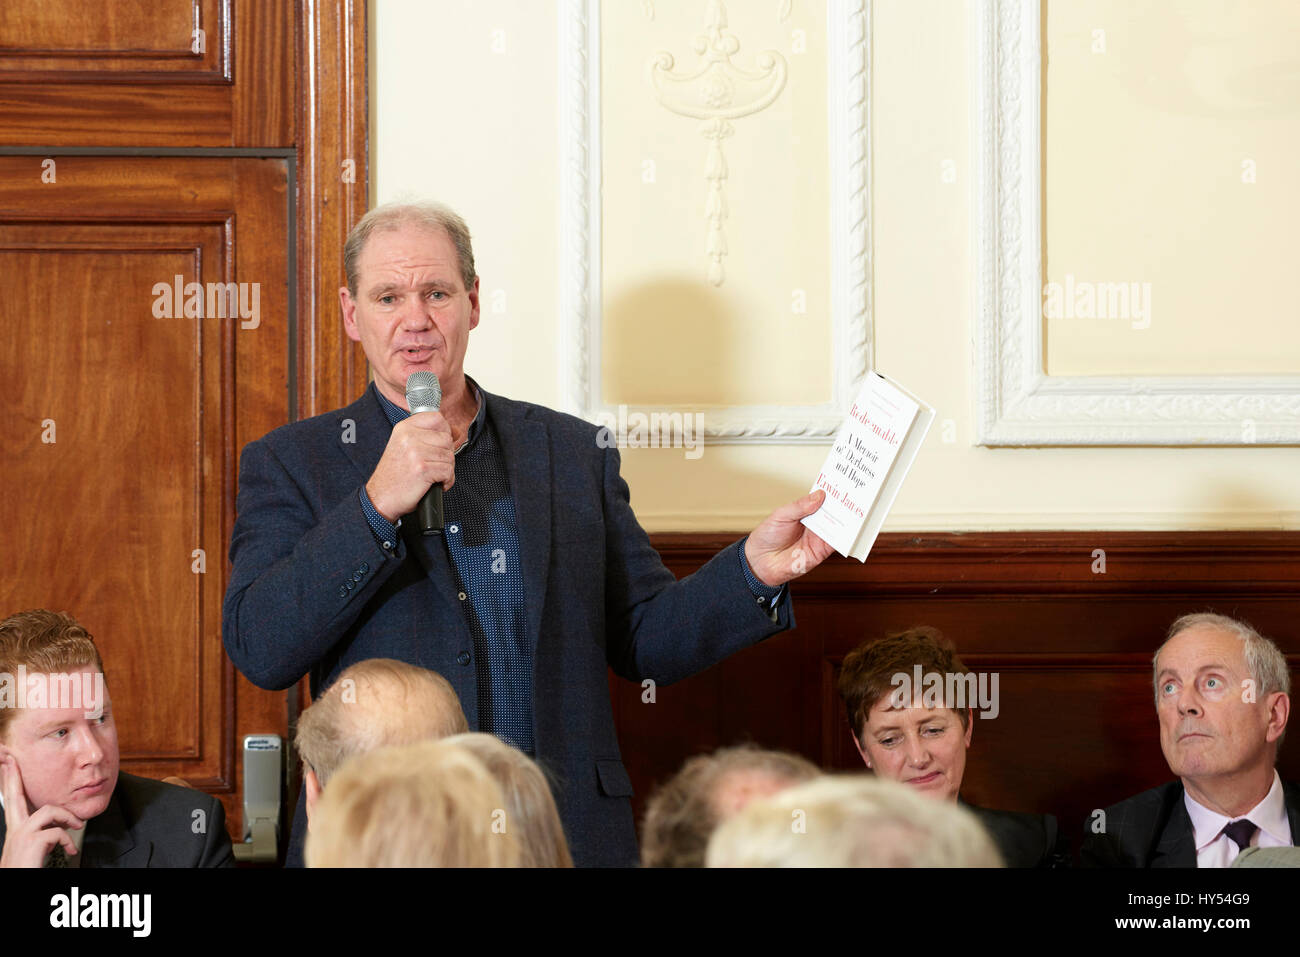 Erwin James at the The Oldie Literary Lunch 13-12-16; Stock Photo